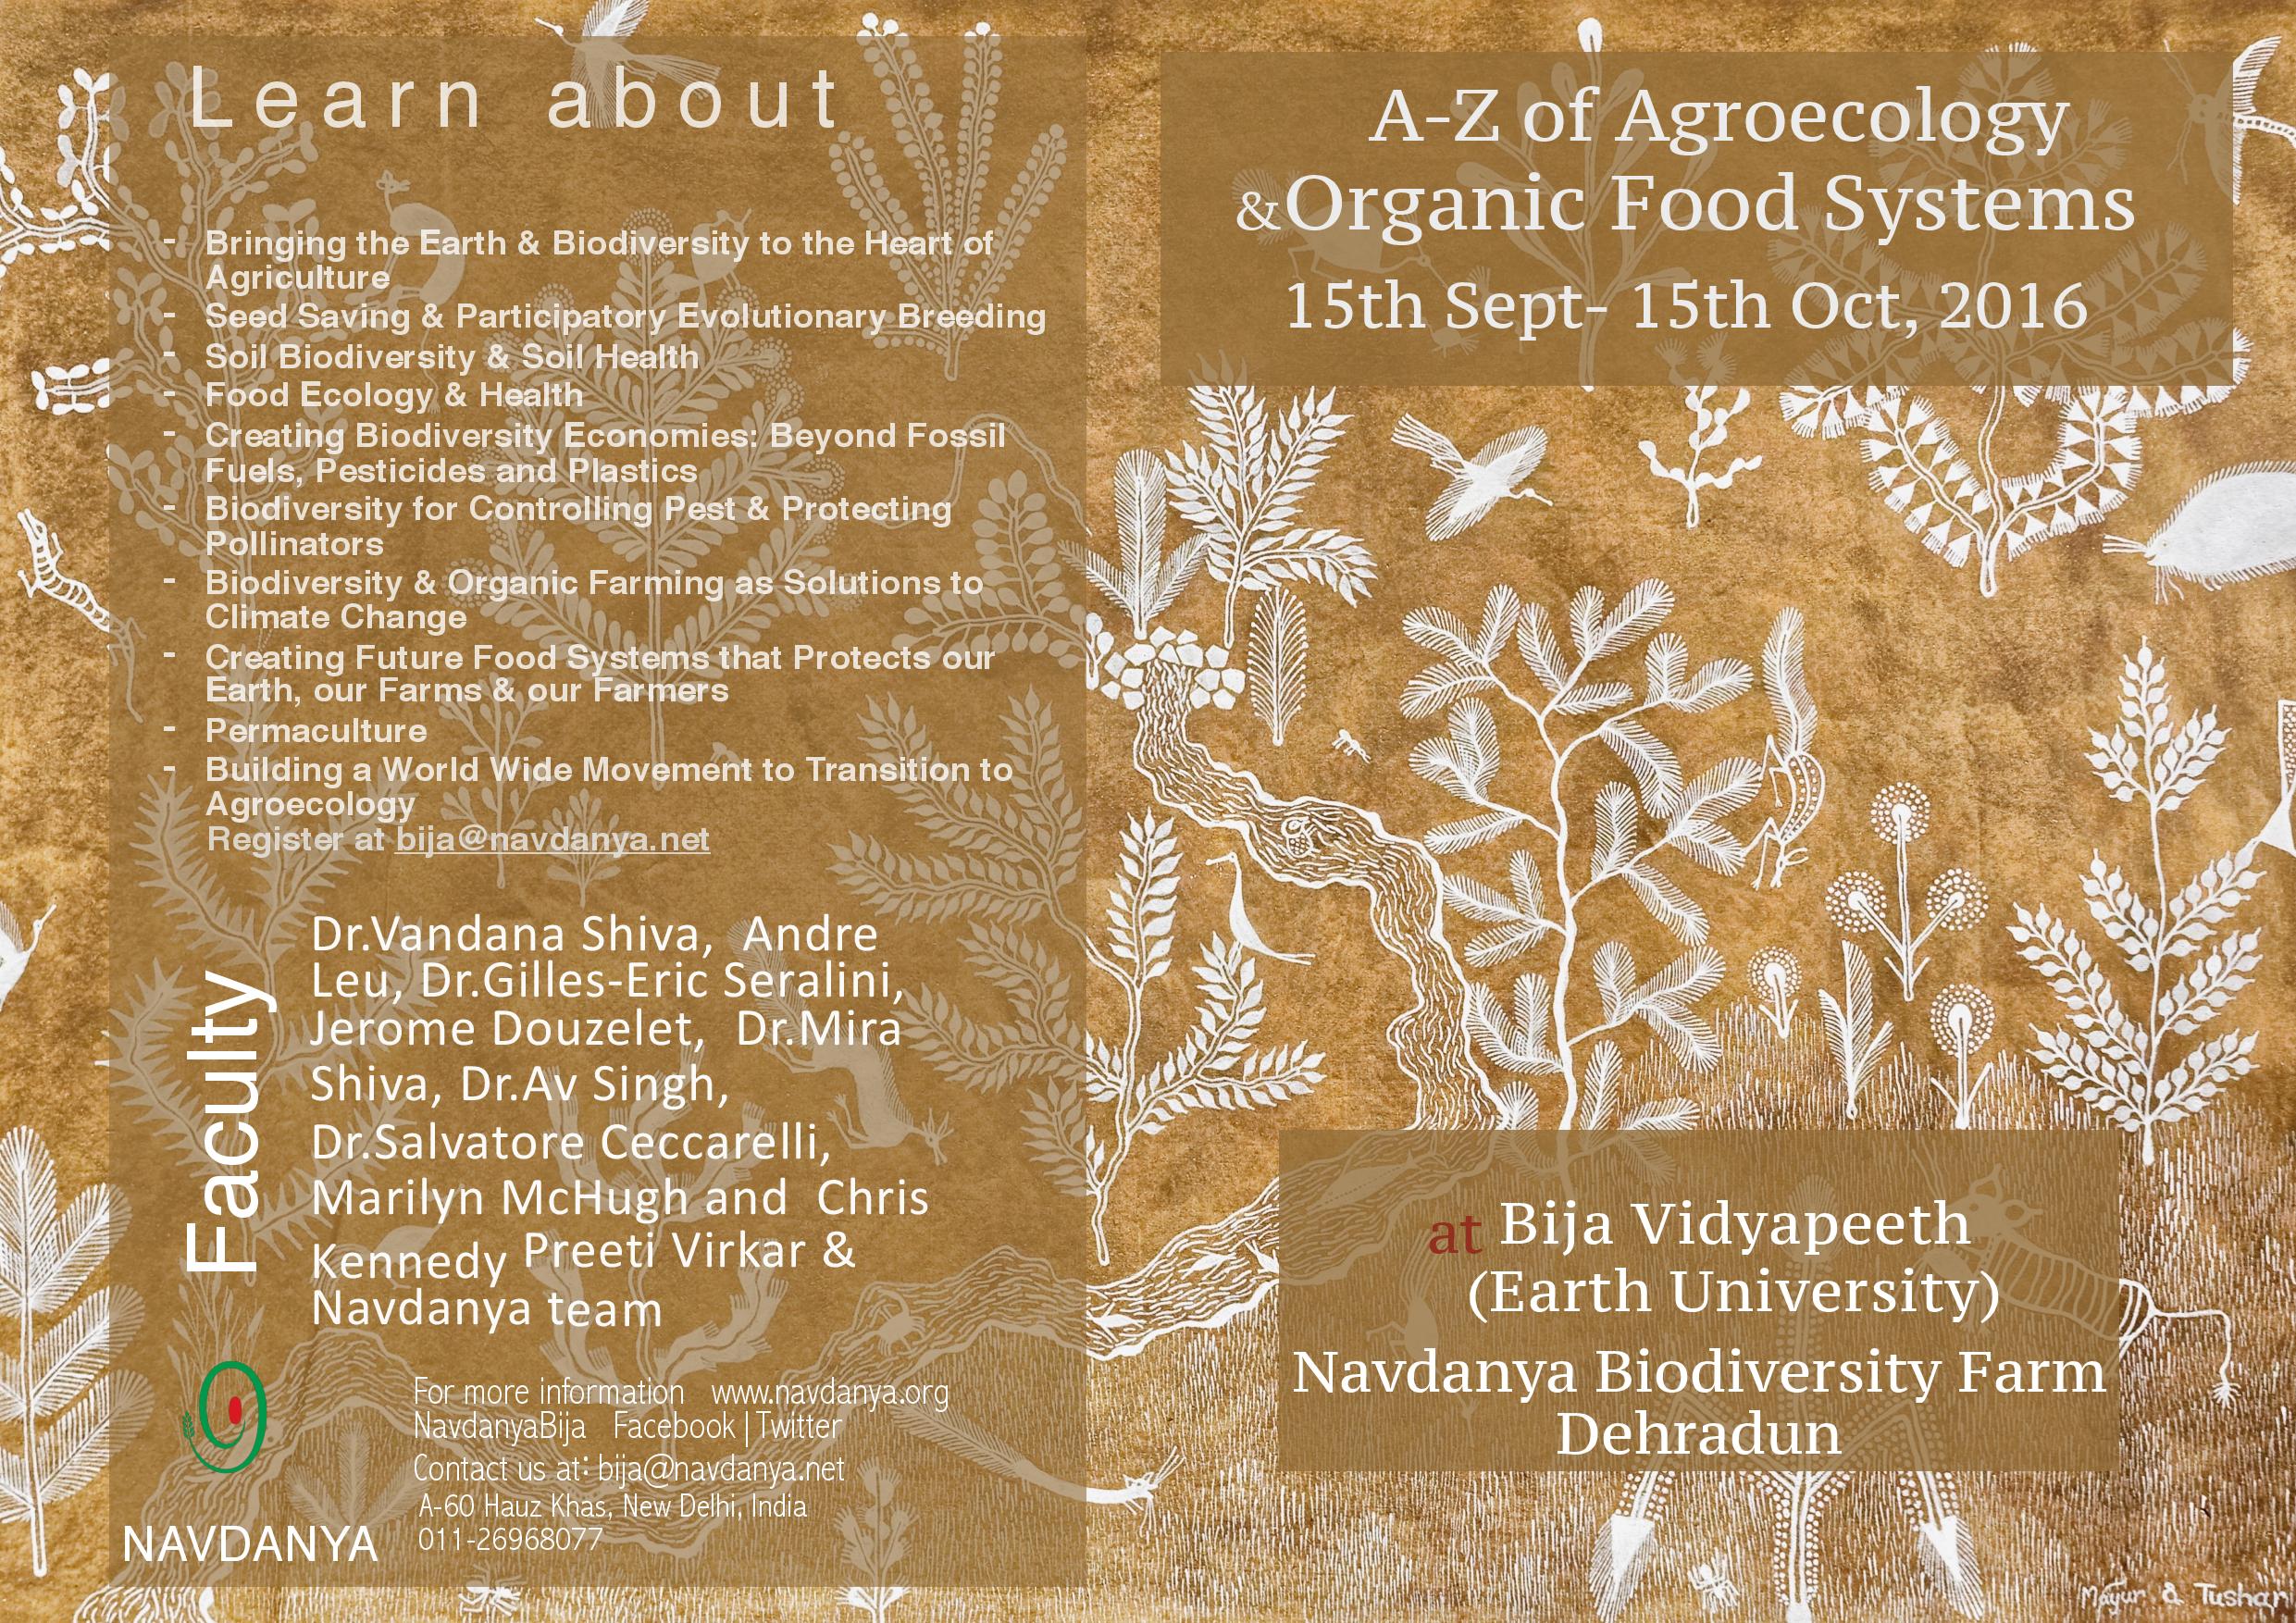 A-Z of Agroecology & Organic Food Systems — 15 September - 15 October 2016